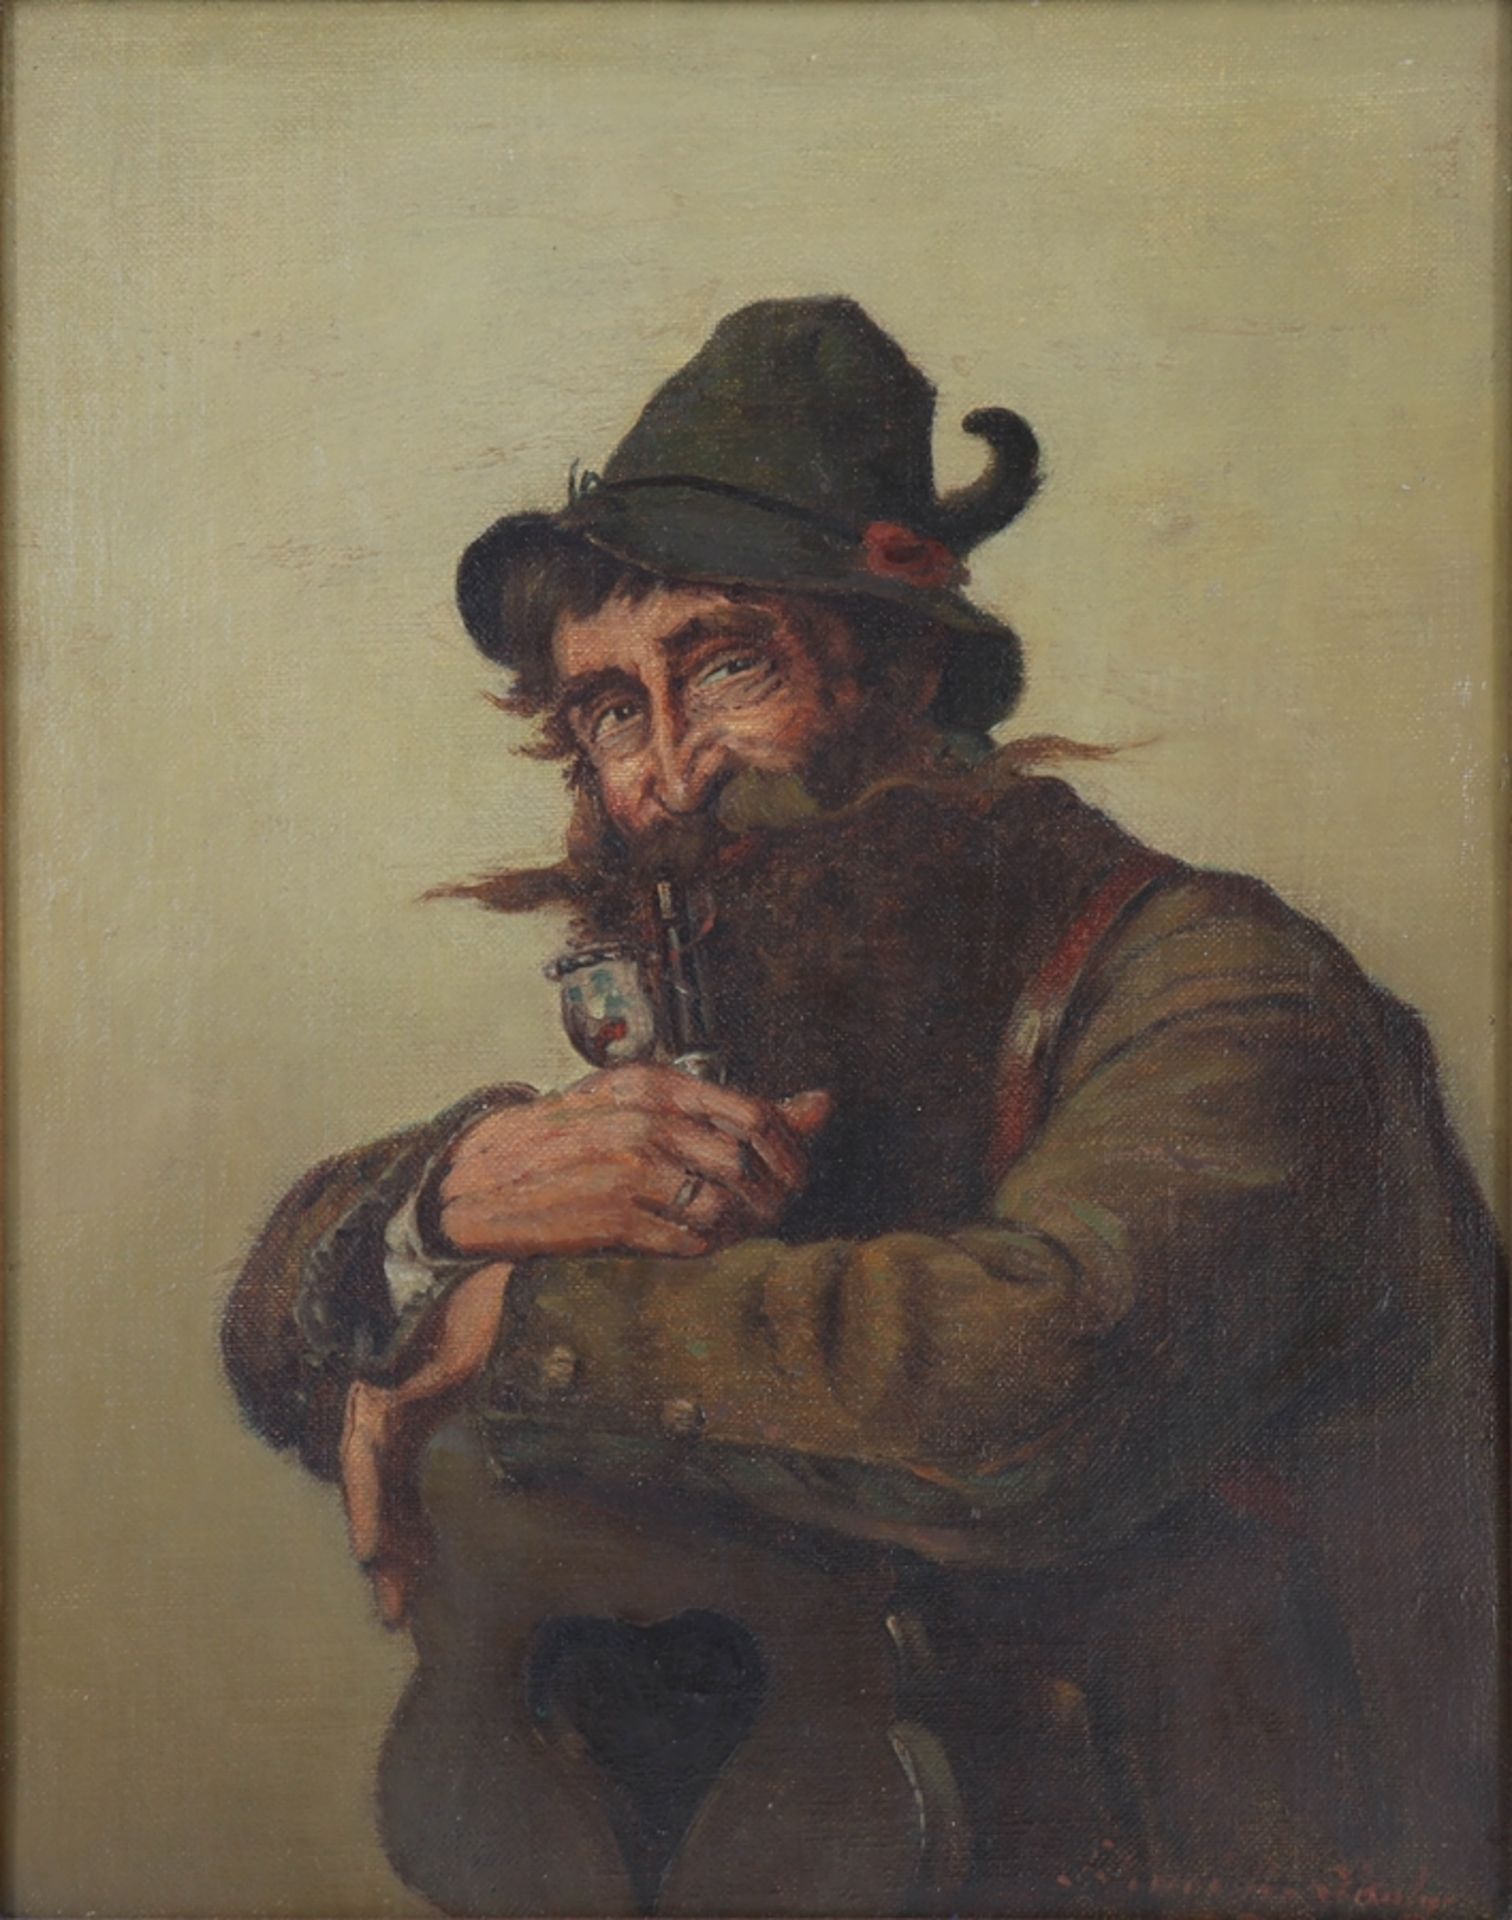 The robber journeyman, oil on canvas, illegibly signed, c. 1900